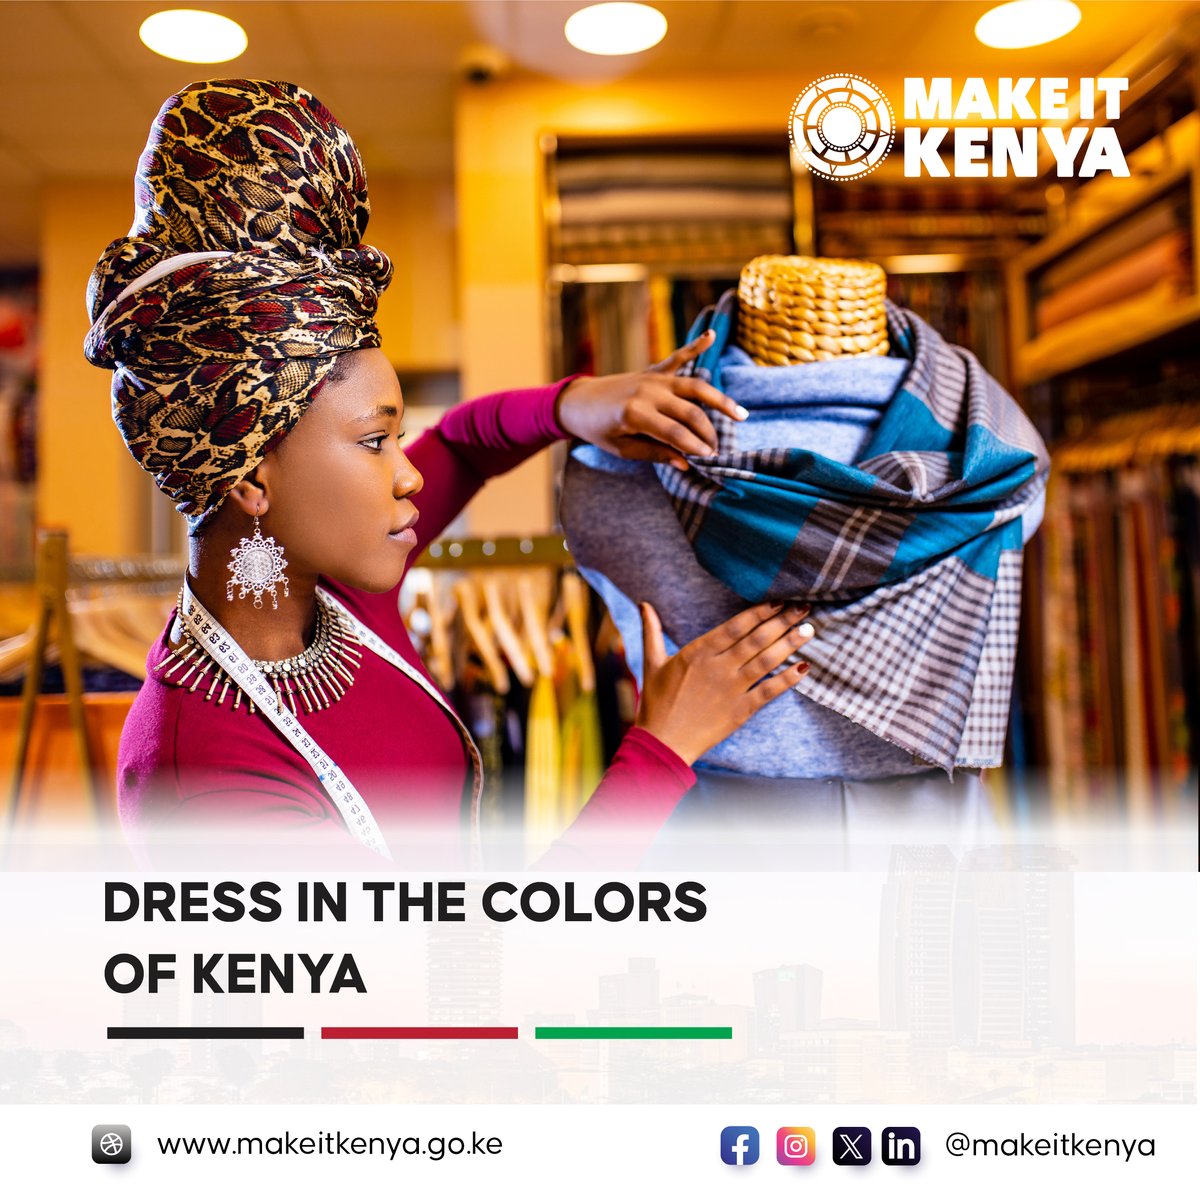 Wrap yourself in the colors of Kenya! Our textiles, rich in bold patterns and luxuriously soft textures, reflect the rich culture and artistry of our nation. #KenyanTextiles